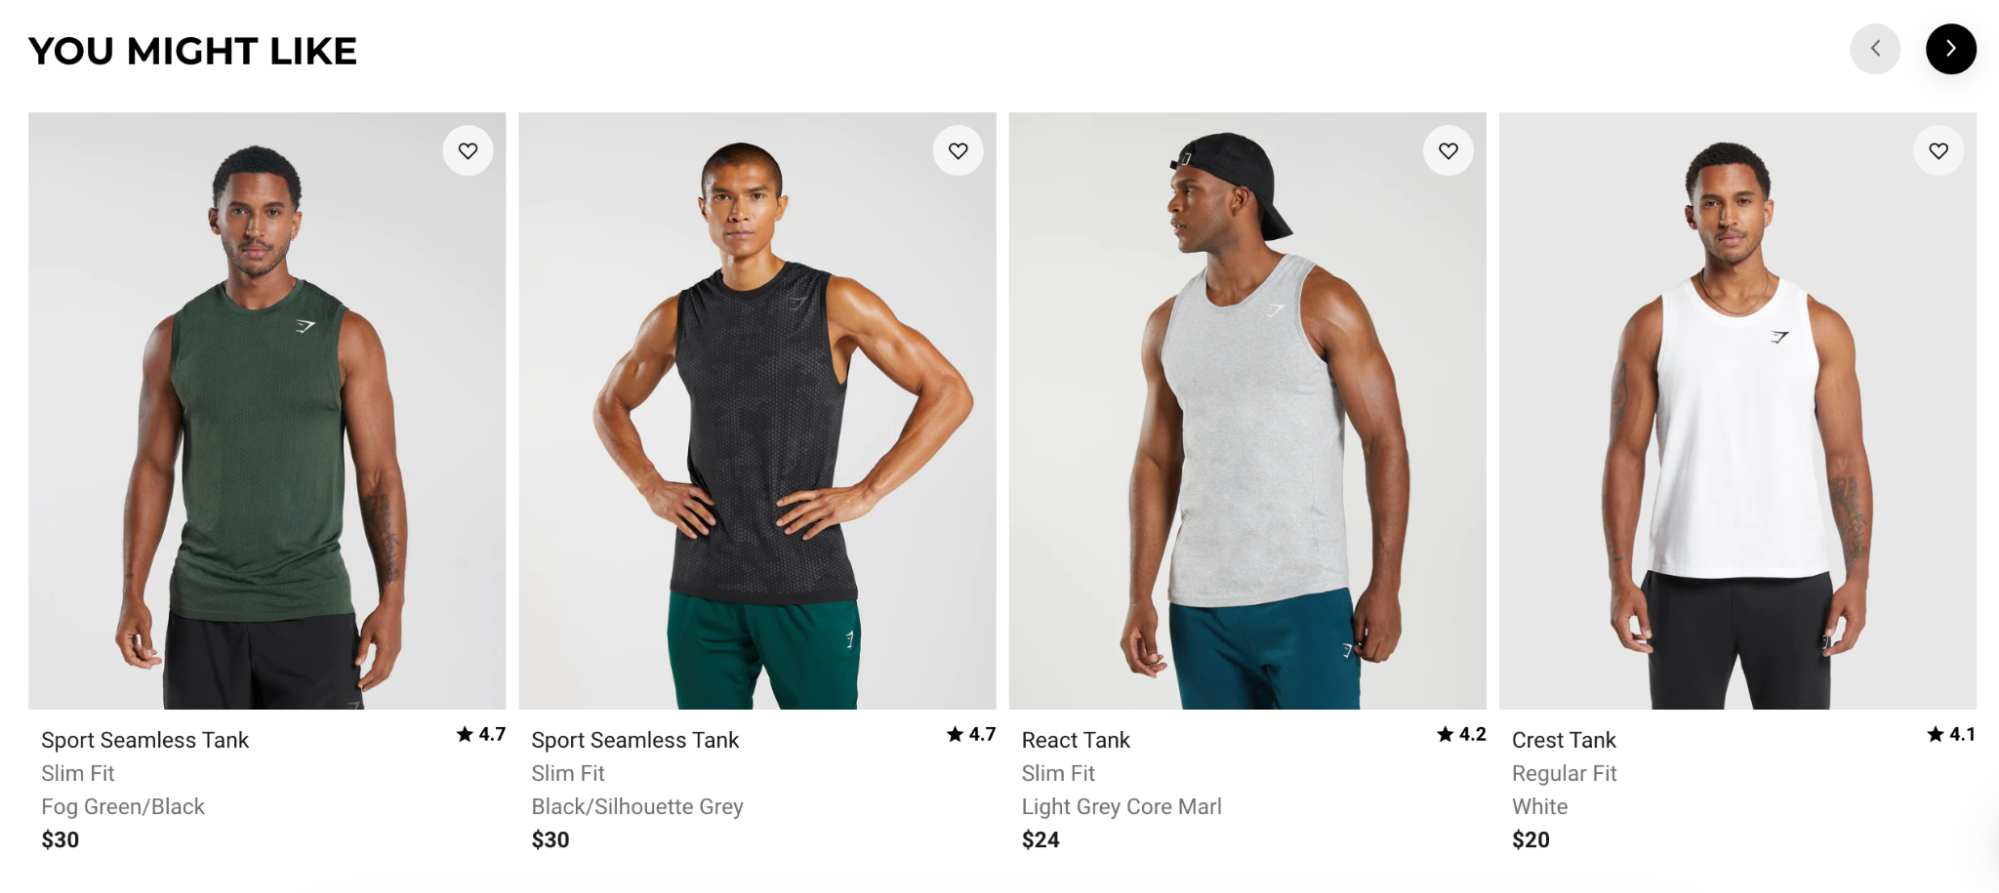 A screenshot of a recommendations carousel from GymShark's website, powered by Algolia